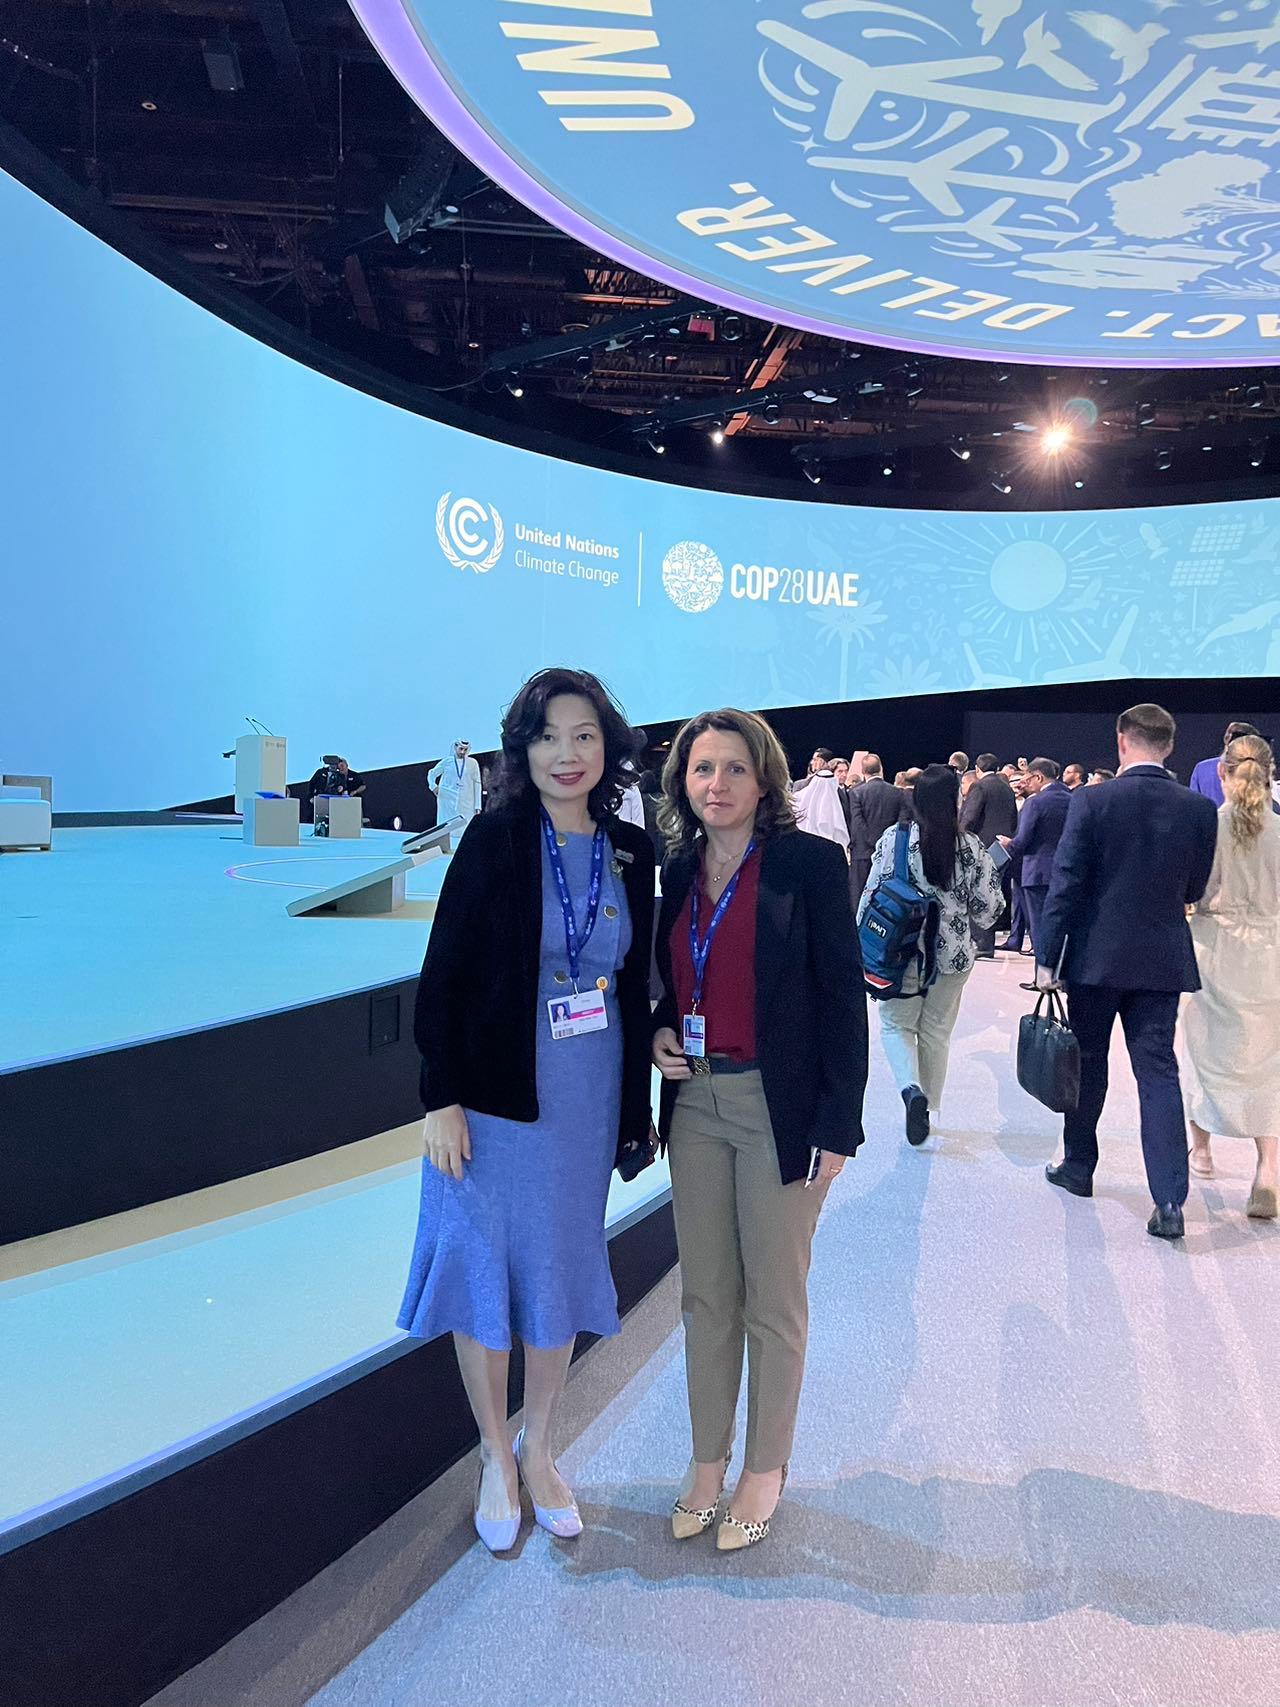 The Permanent Secretary for Financial Services and the Treasury (Financial Services), Ms Salina Yan, yesterday (December 4, Dubai time) attended the "Global Climate Action Through Fostering Sustainable Finance" event held at the 28th Conference of the Parties to United Nations Framework Convention on Climate Change. Photo shows Ms Yan (left) and the Chief Executive Officer and Founder of Intensel Limited, Dr Entela Benz (right). Intensel Limited is a climate technology company based in Hong Kong.